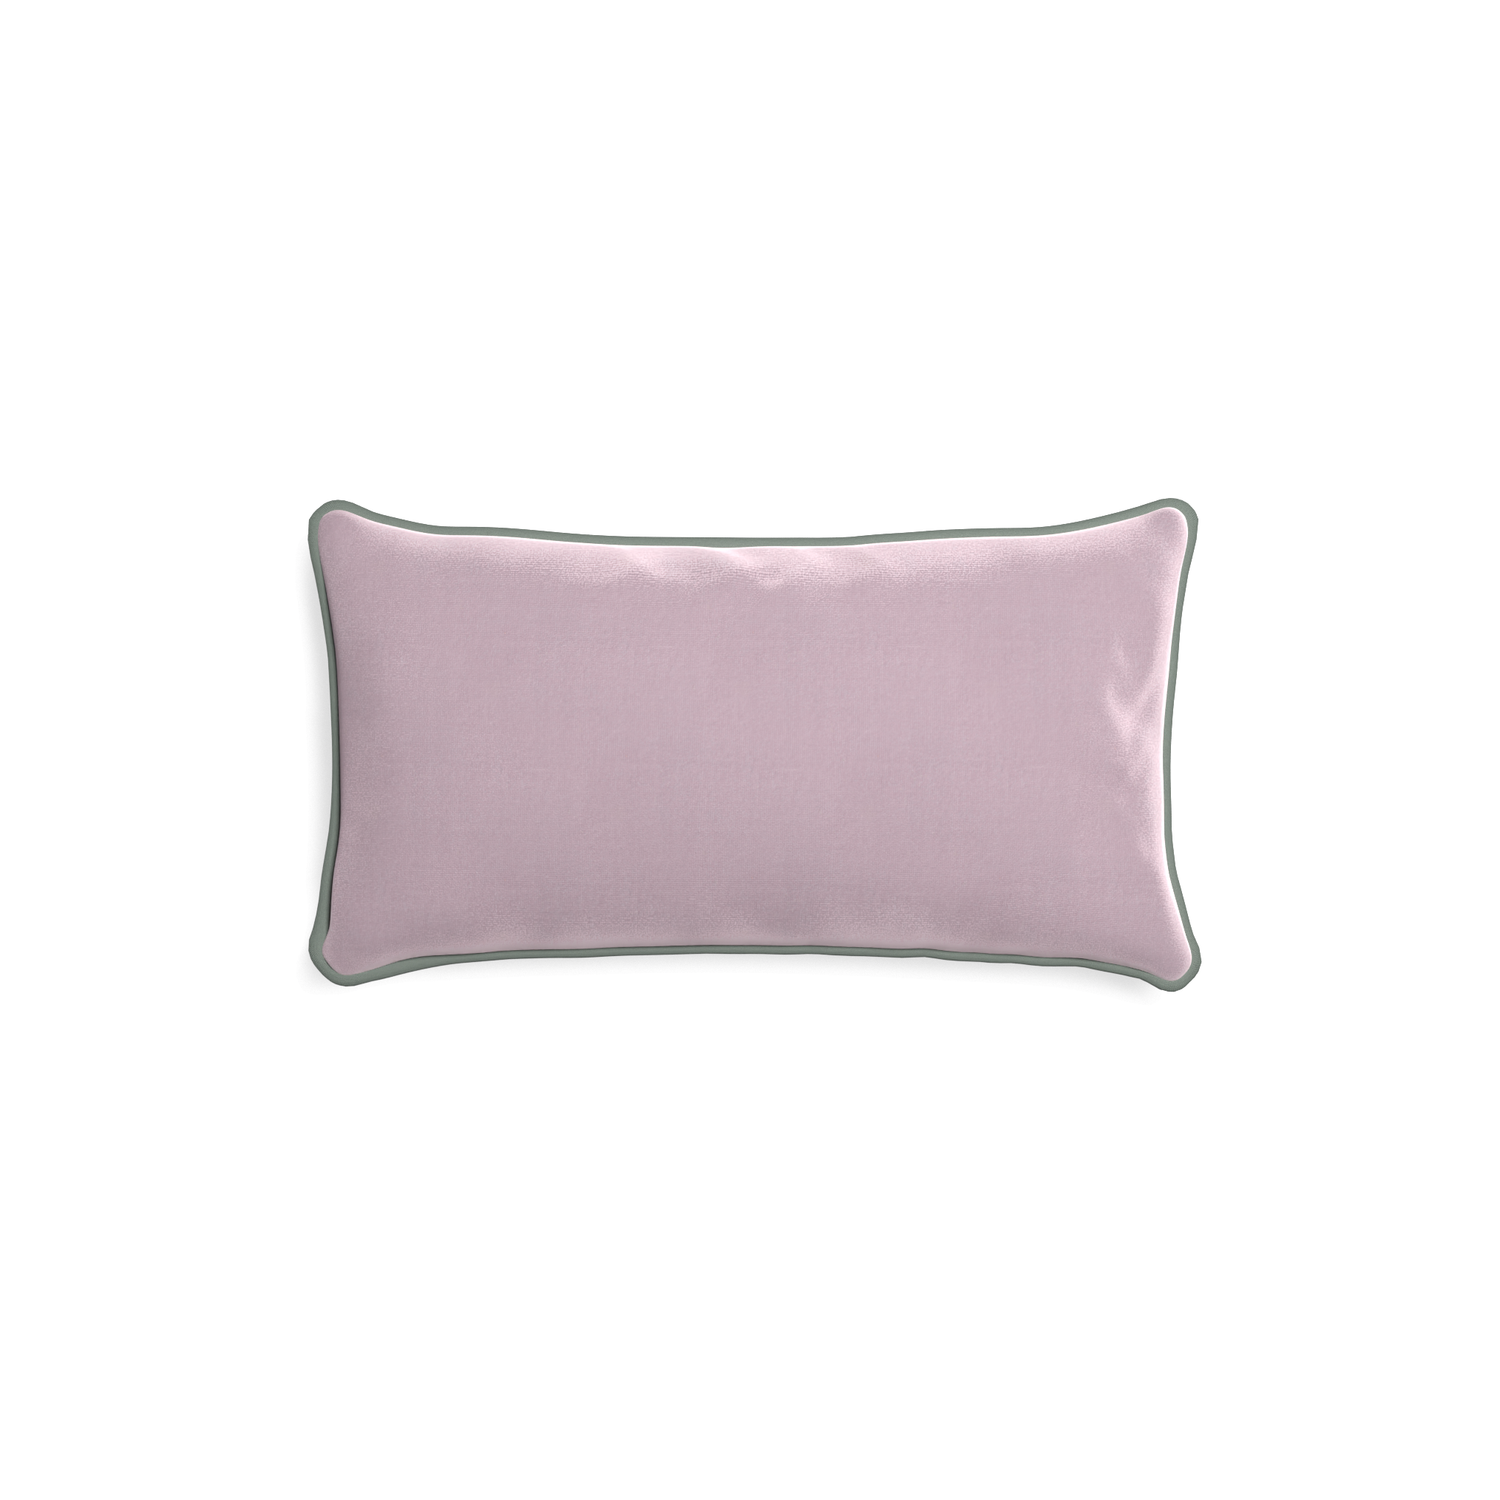 Petite-lumbar lilac velvet custom lilacpillow with sage piping on white background